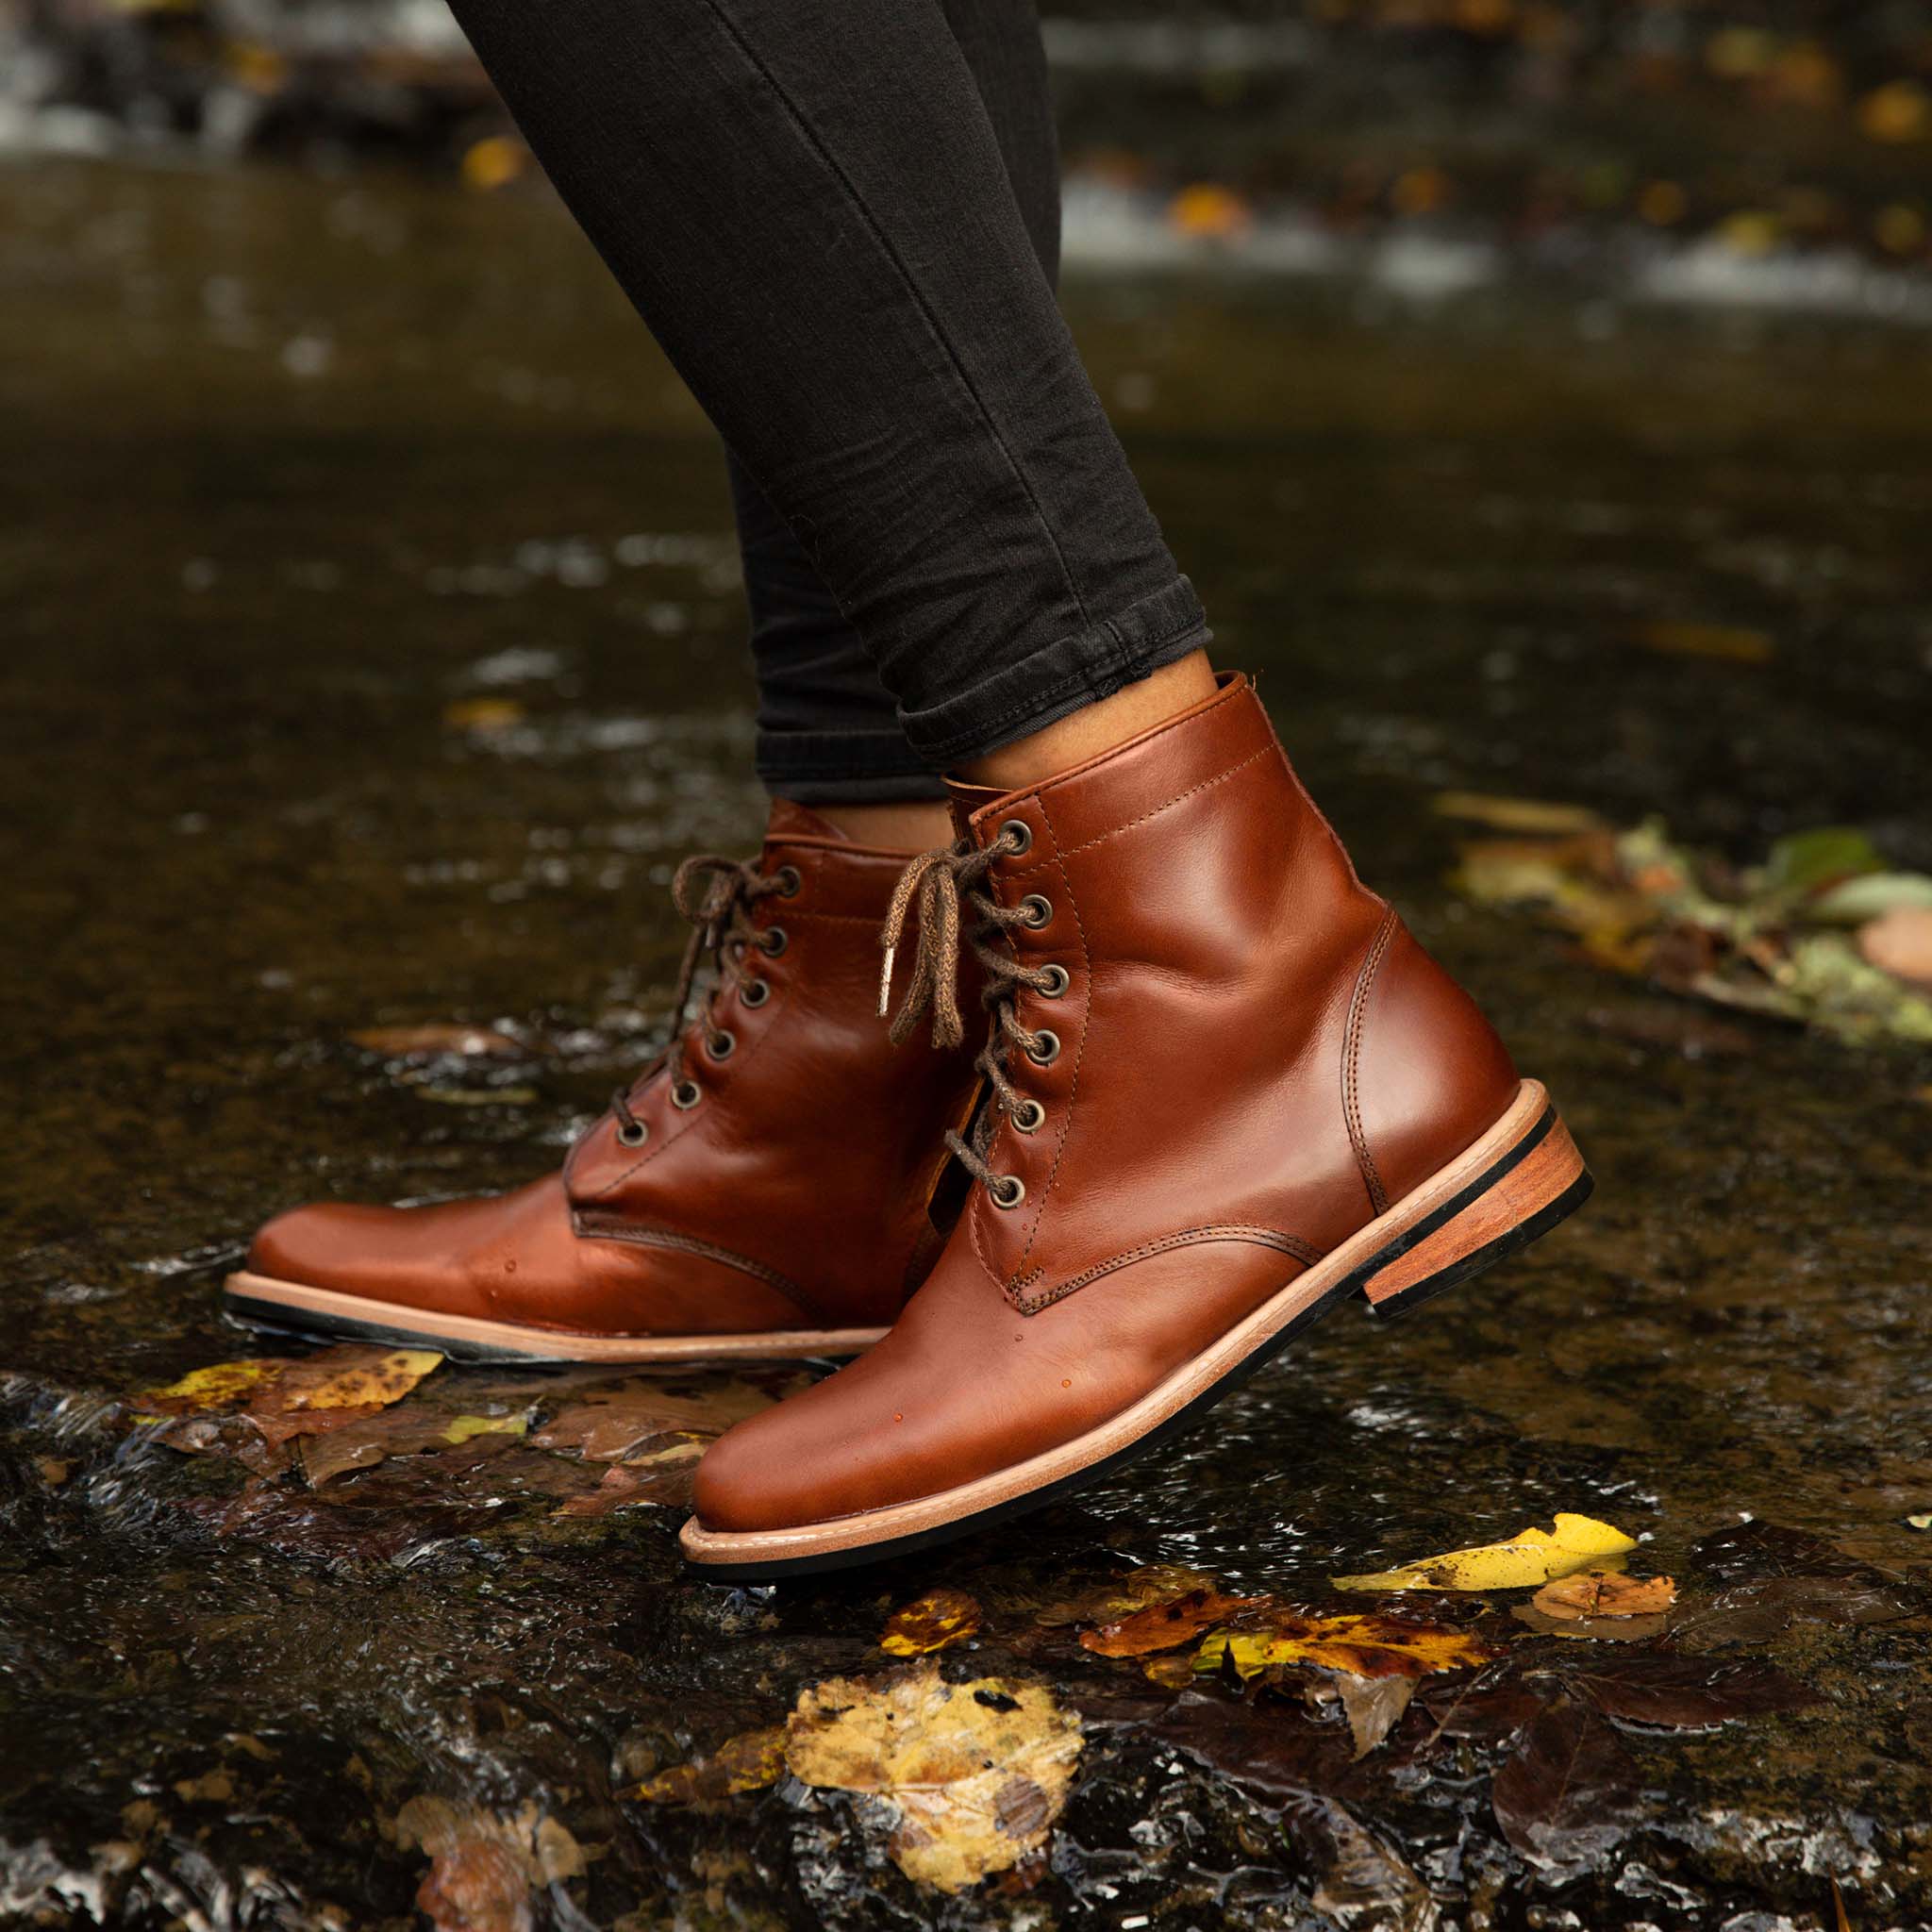 Image 1 of the All-Weather Amalia Boot Brandy Women's Leather Boot Nisolo 